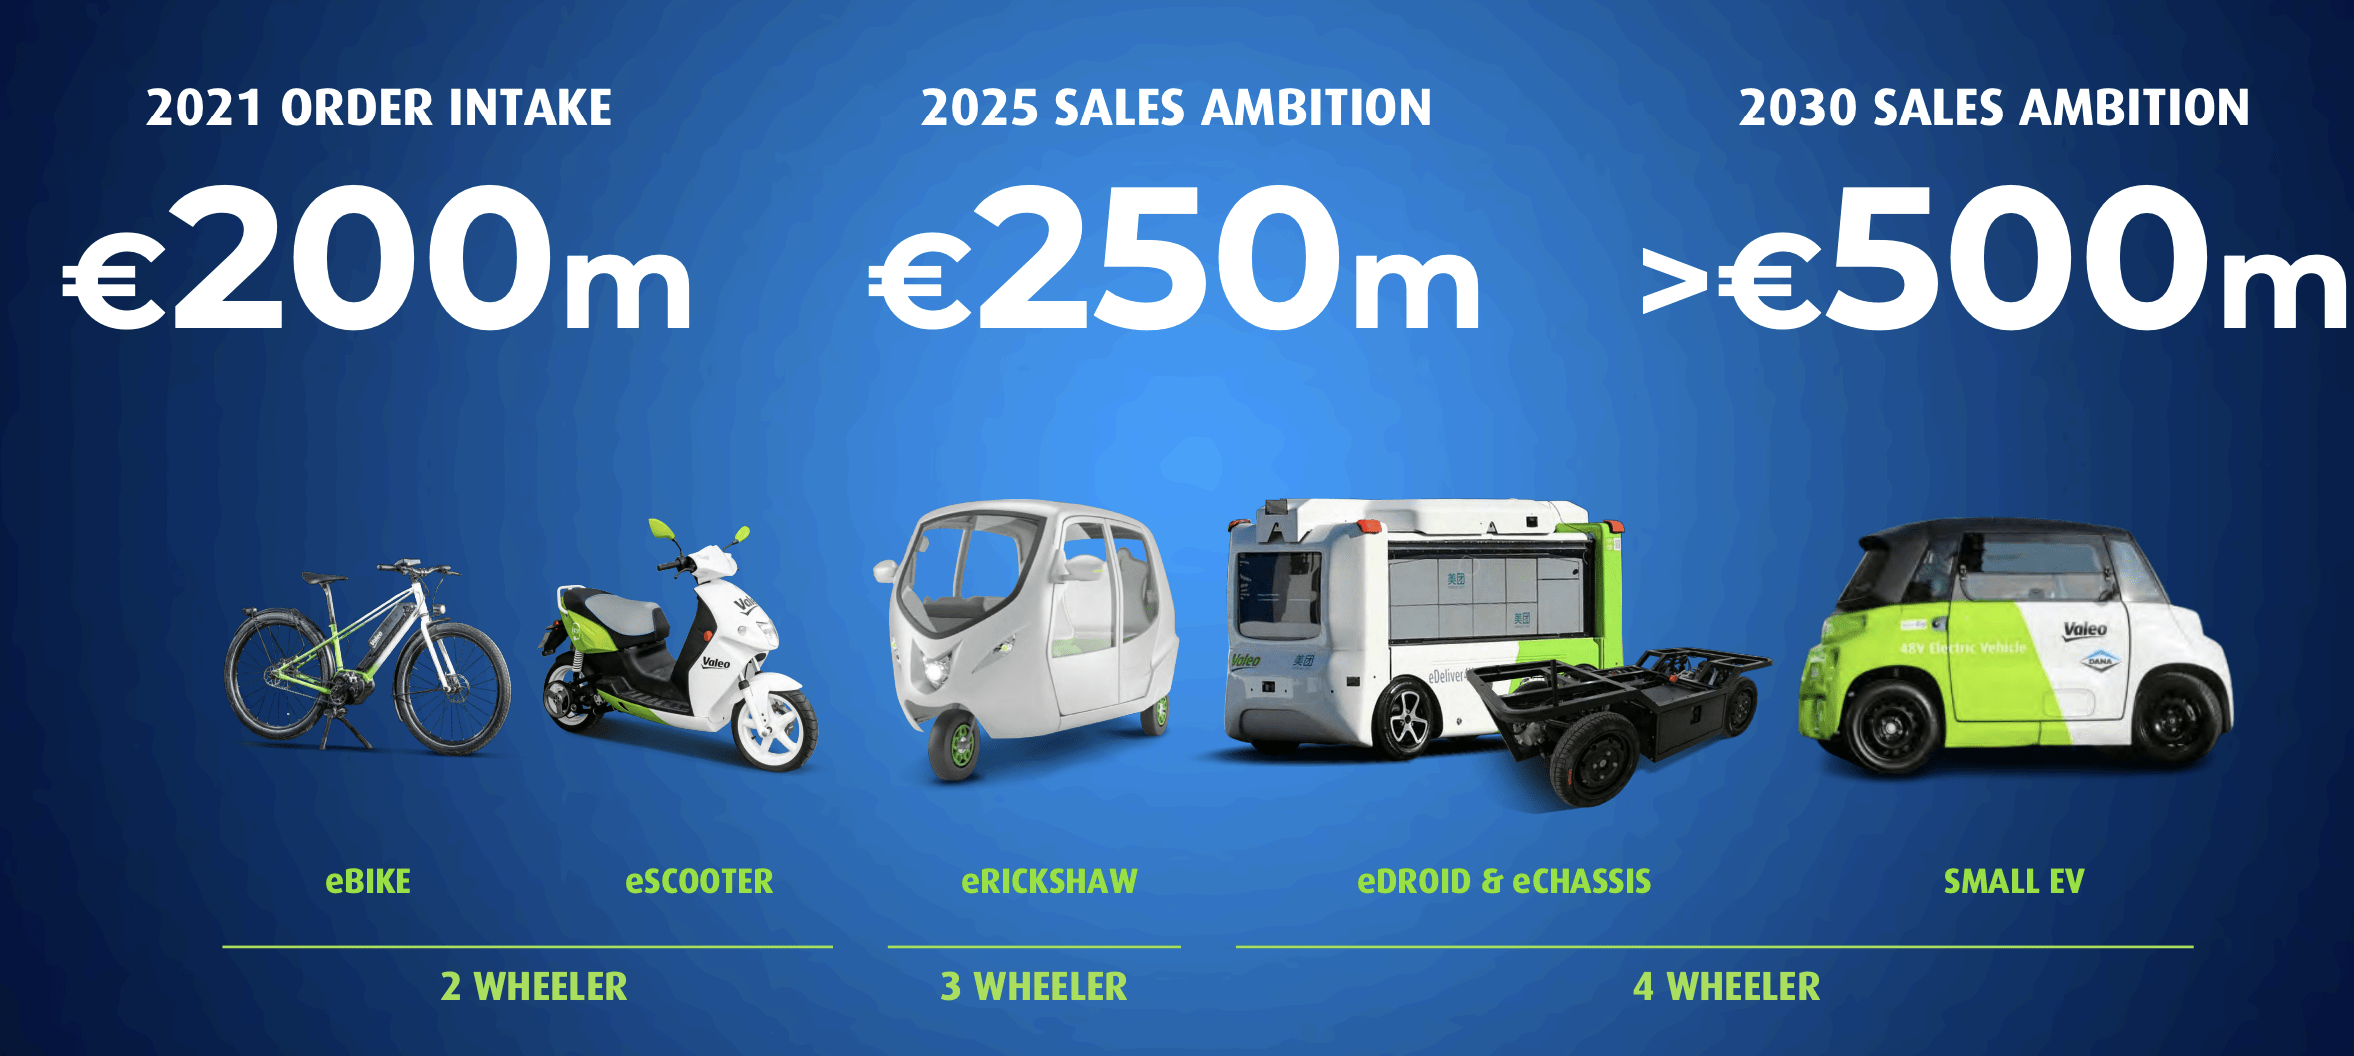 Valeo sees more growth from car electrification and automation as orders  hit record